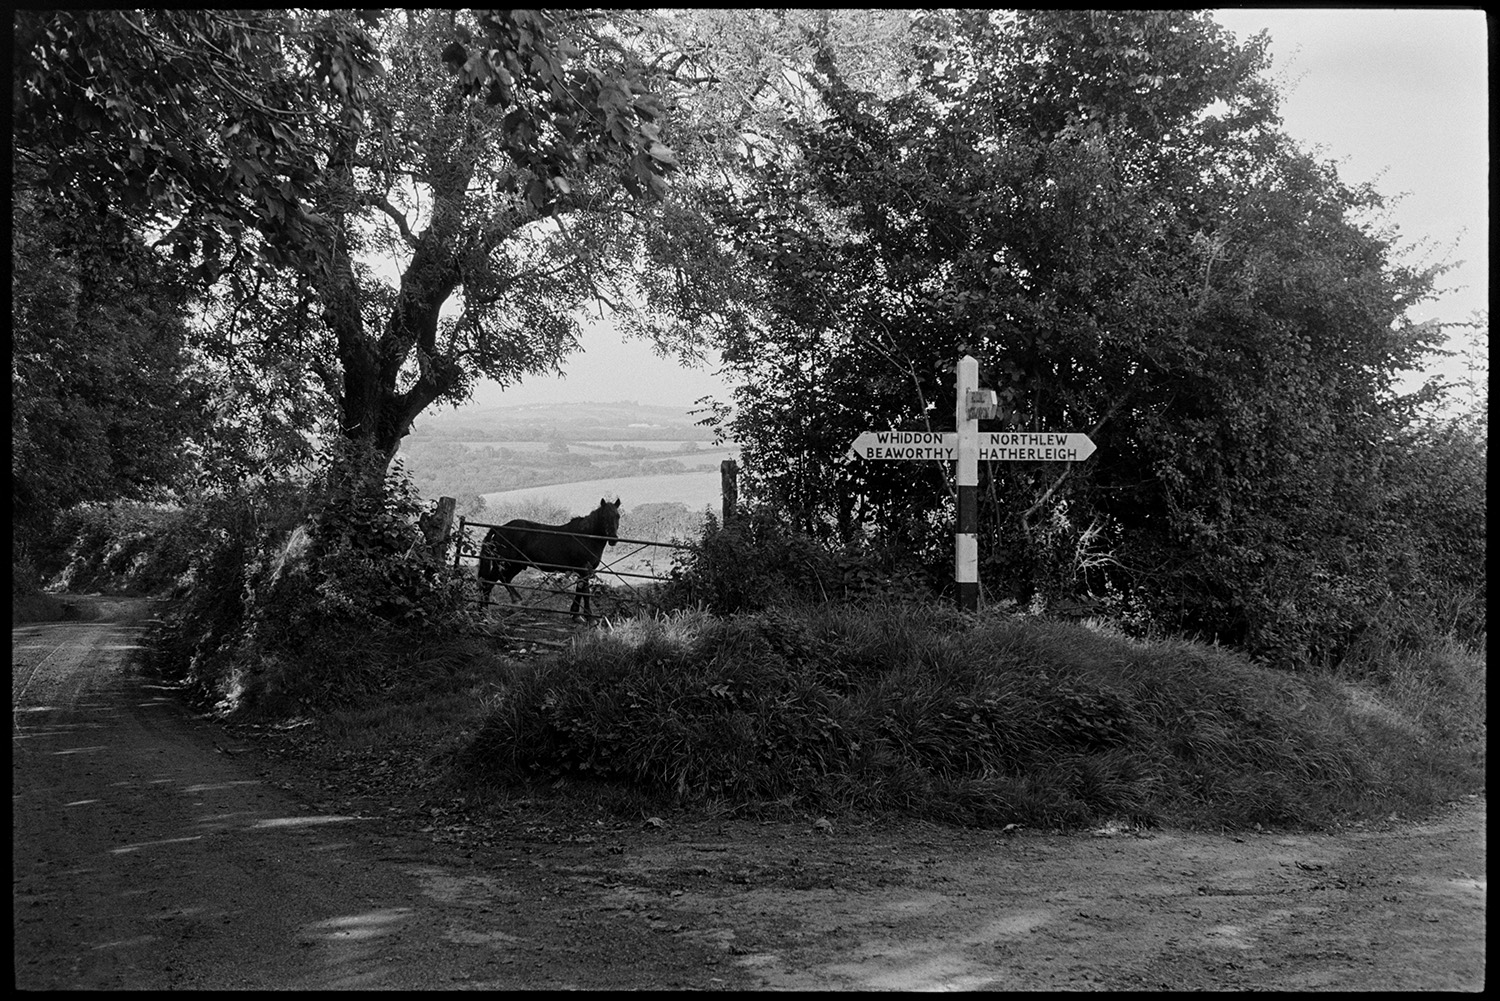 A signpost by a road junction, possibly near Northlew, Beaworthy. A horse is looking over a field gate in the background.